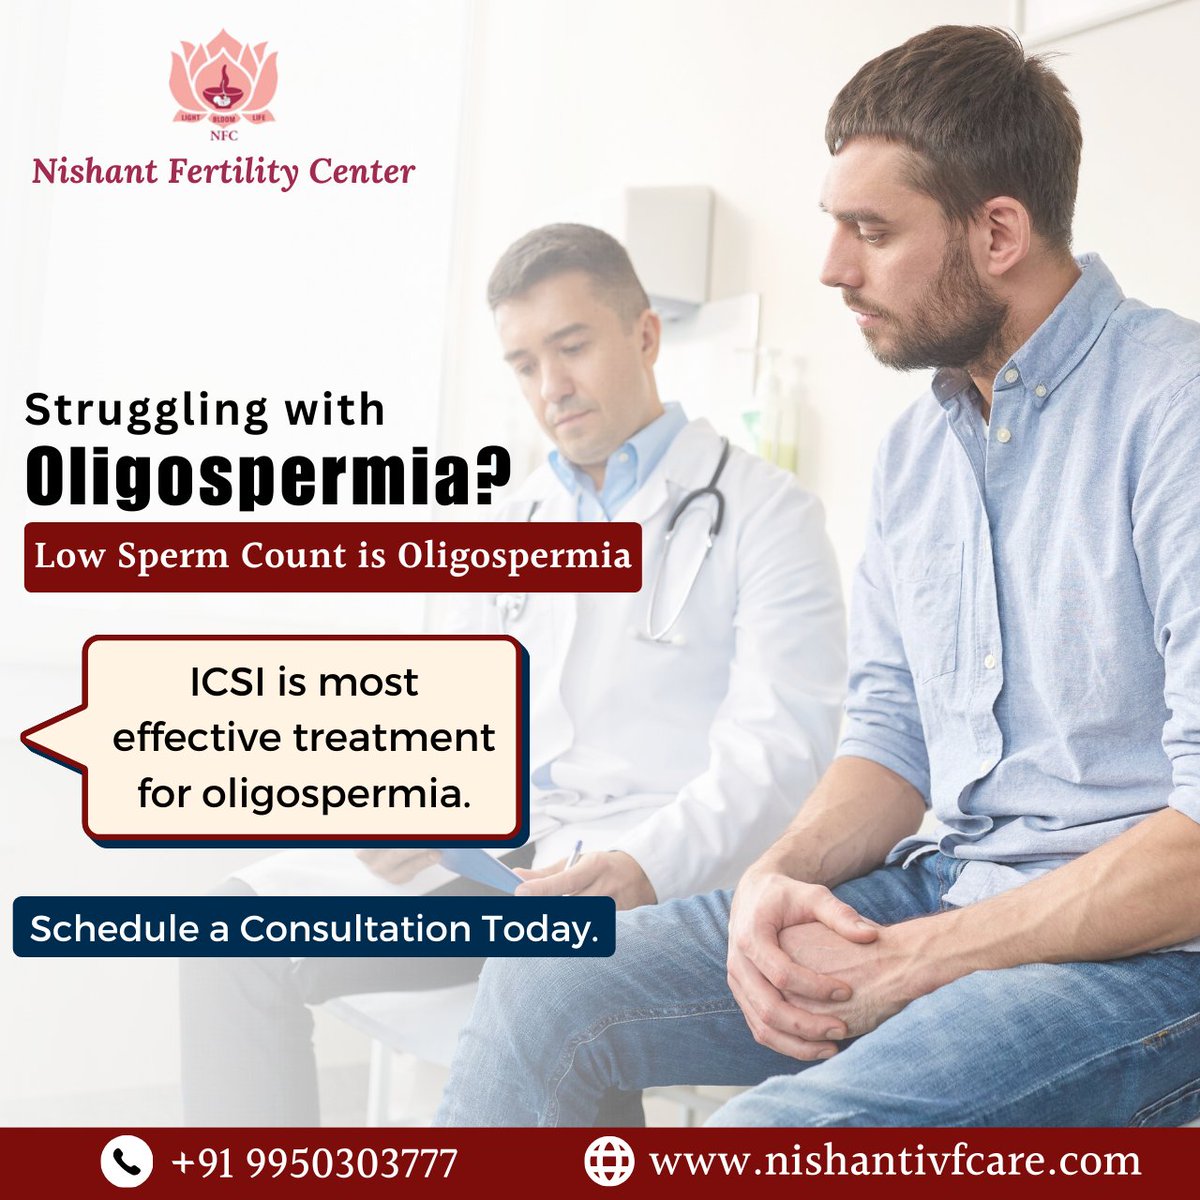 Dealing with Oligospermia? Low sperm count can be challenging, but there's hope with ICSI, the most effective treatment for oligospermia. 
Call +91 9950303777

#Oligospermia #Lowspermcount #maleinfertility #ICSI #ICSItreatment #Infertility #ivf #jaipur #Twitter 
#drnishantDixit